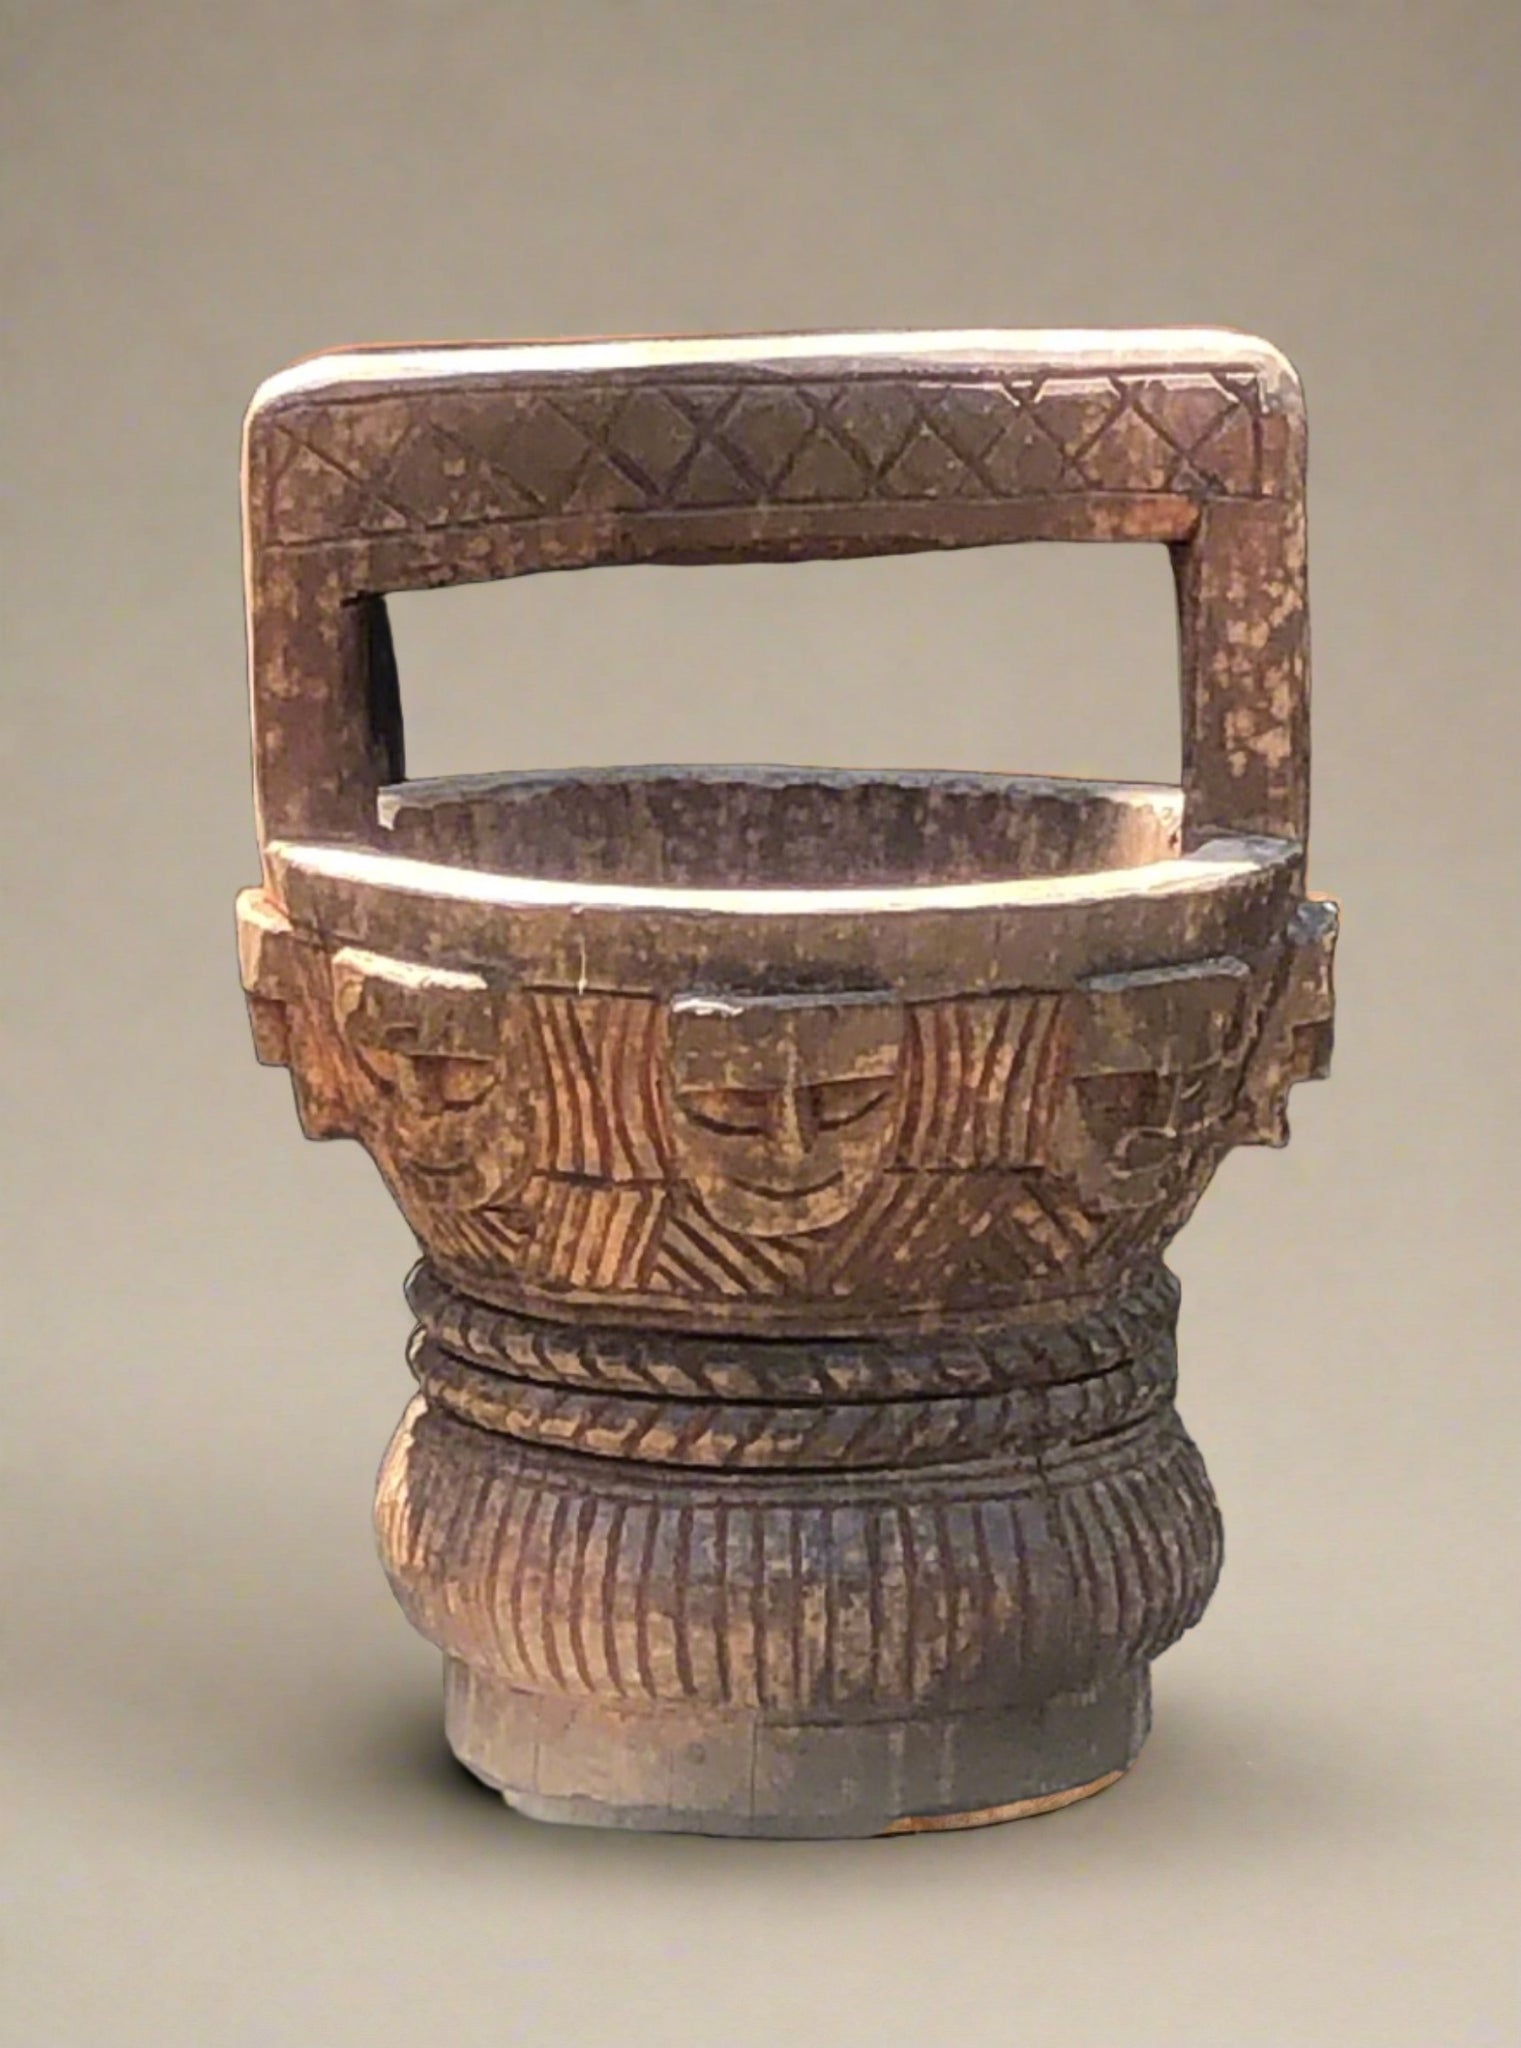 Primitive hand-carved wooden water carrier or pot with carved face features.